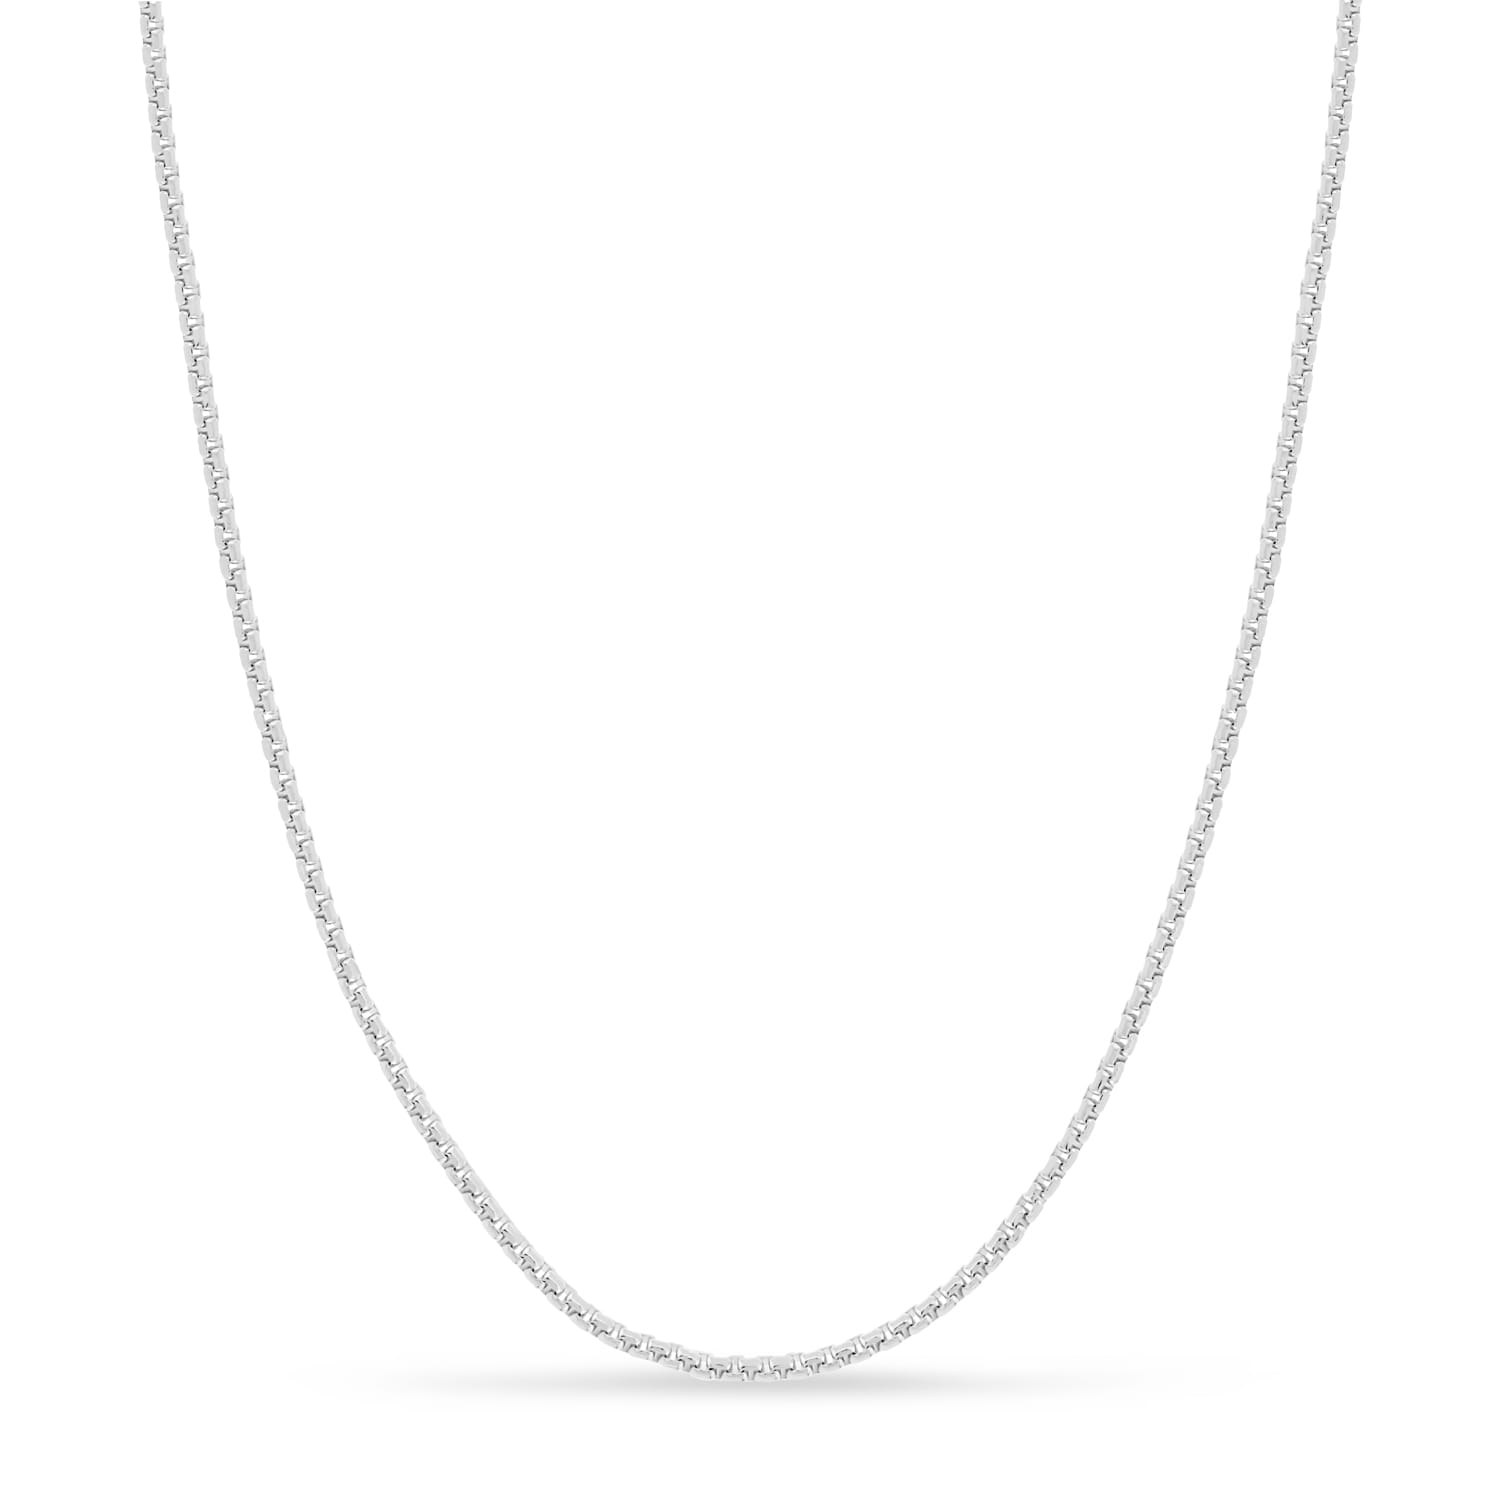 Large Round Box Chain Necklace 14k White Gold